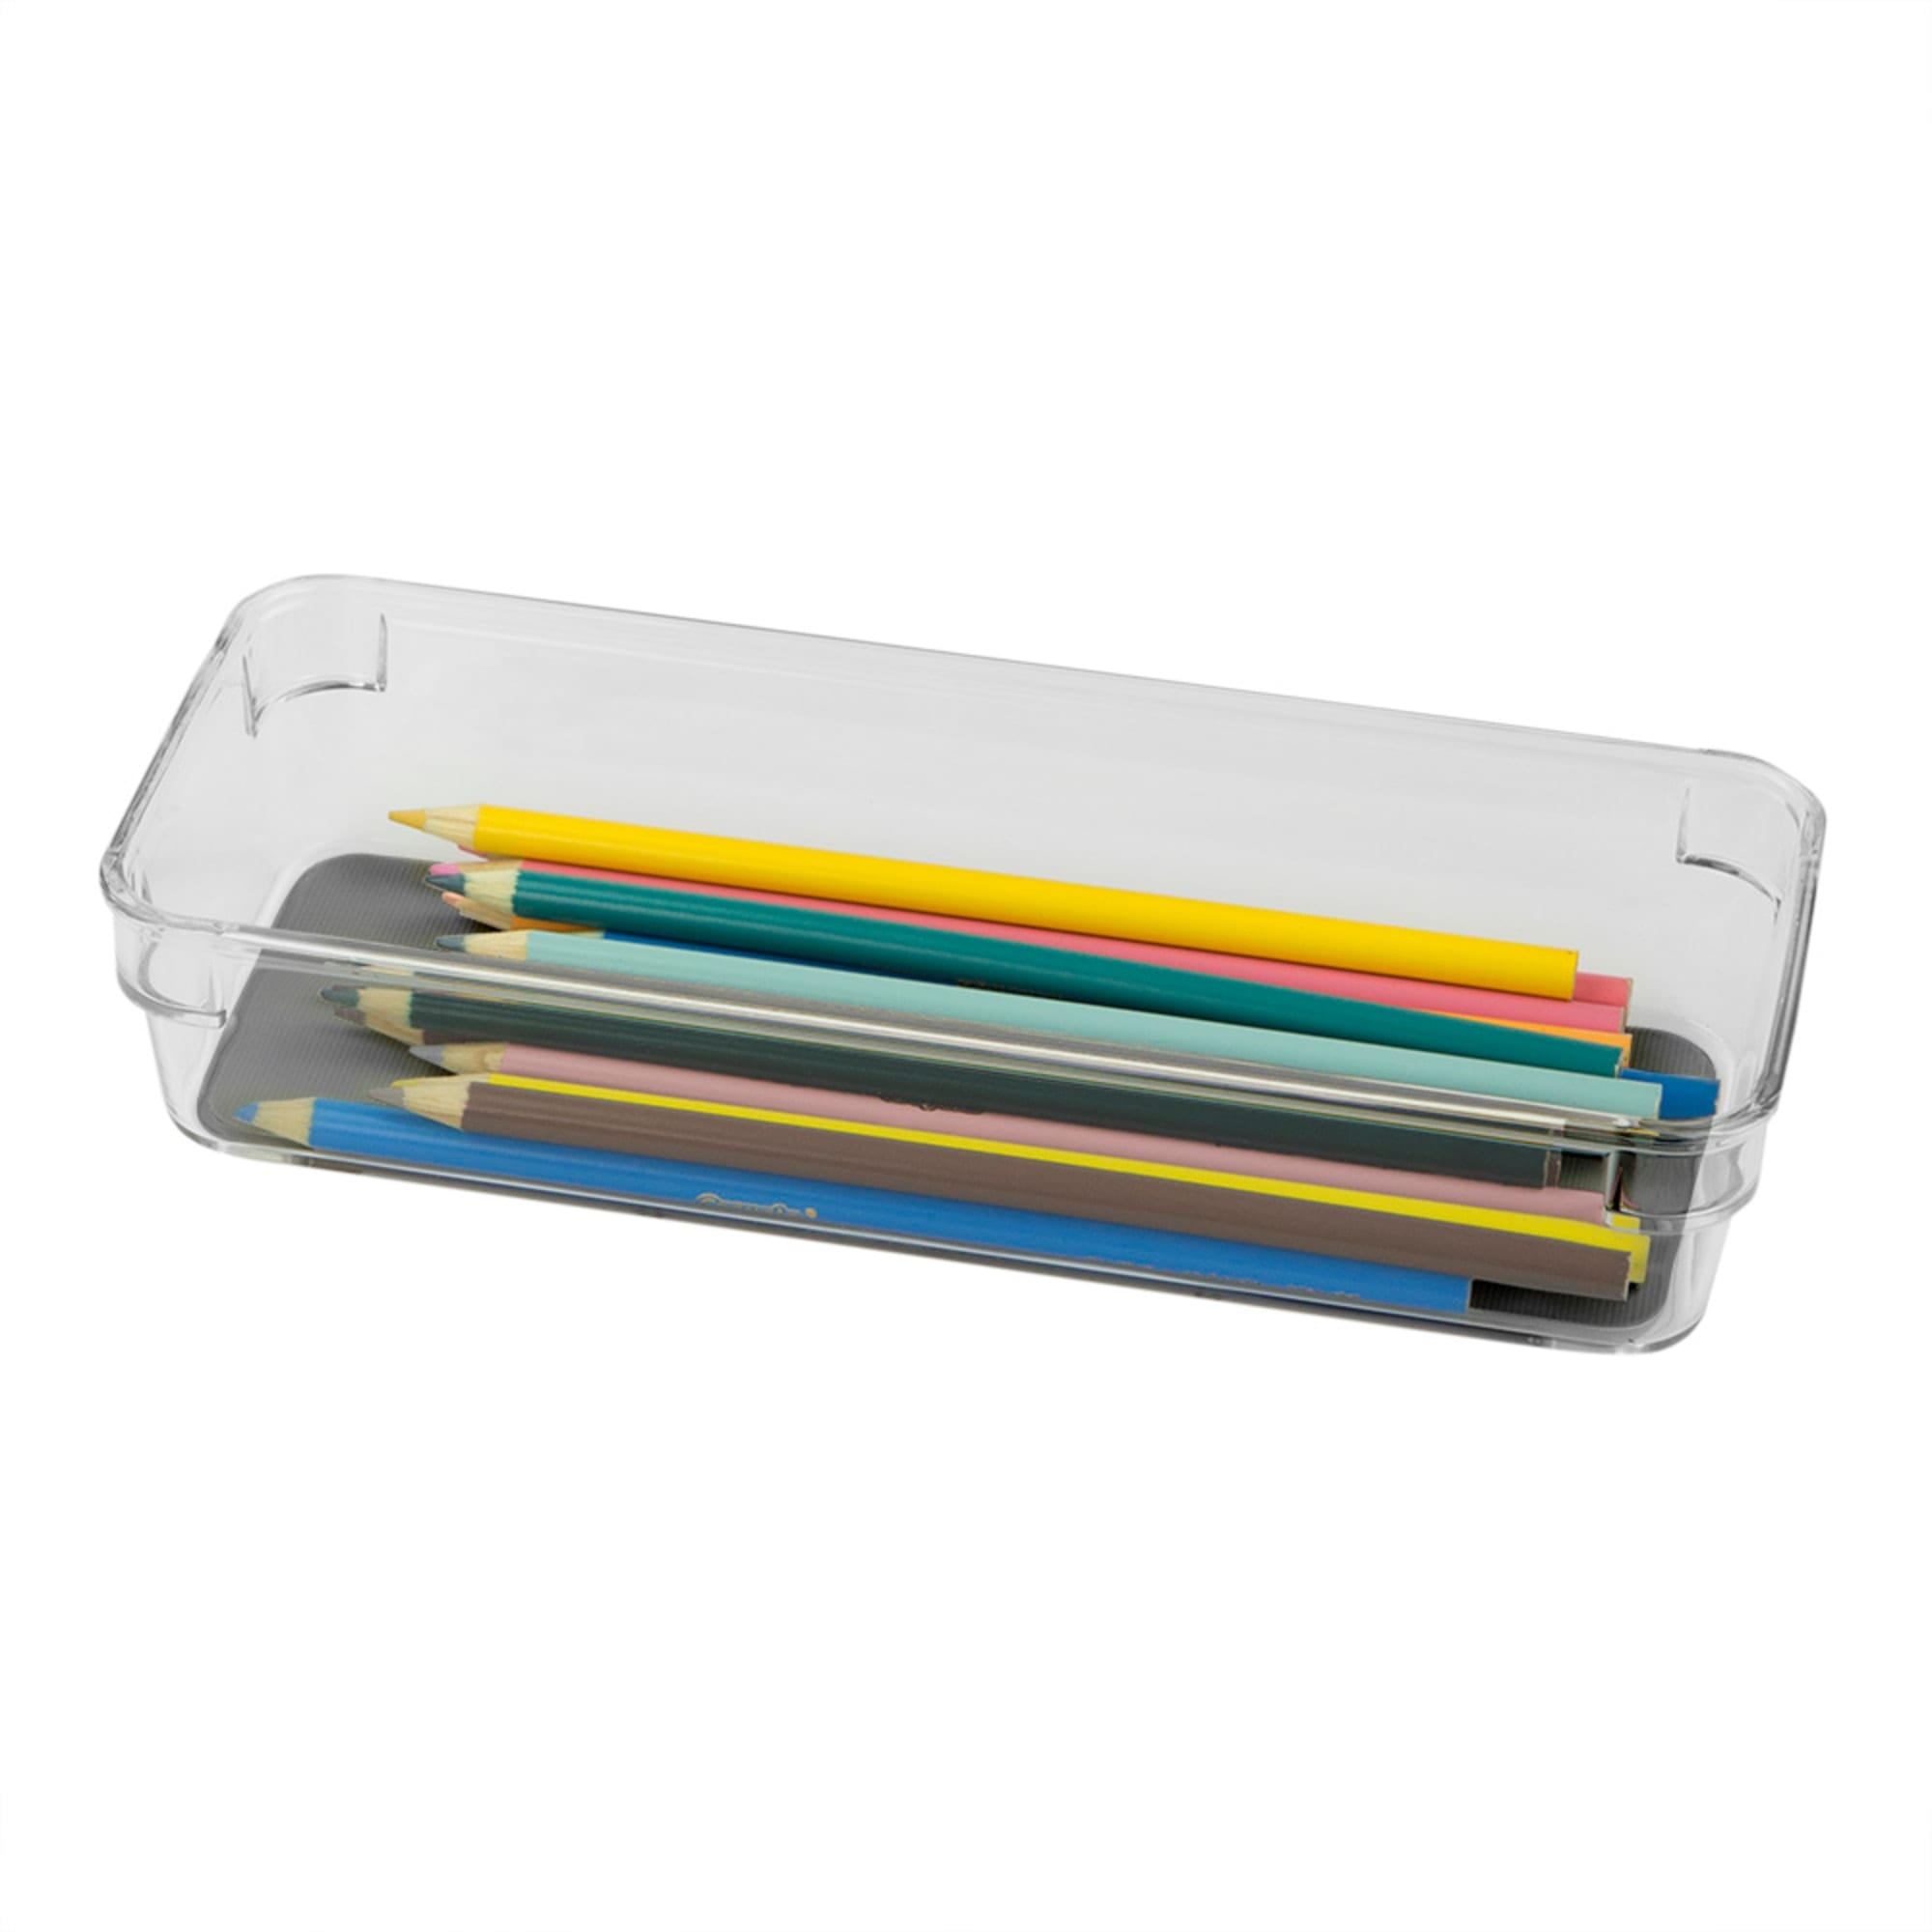 Home Basics 3" x 9" x 2" Plastic Drawer Organizer with Rubber Liner $2.00 EACH, CASE PACK OF 24